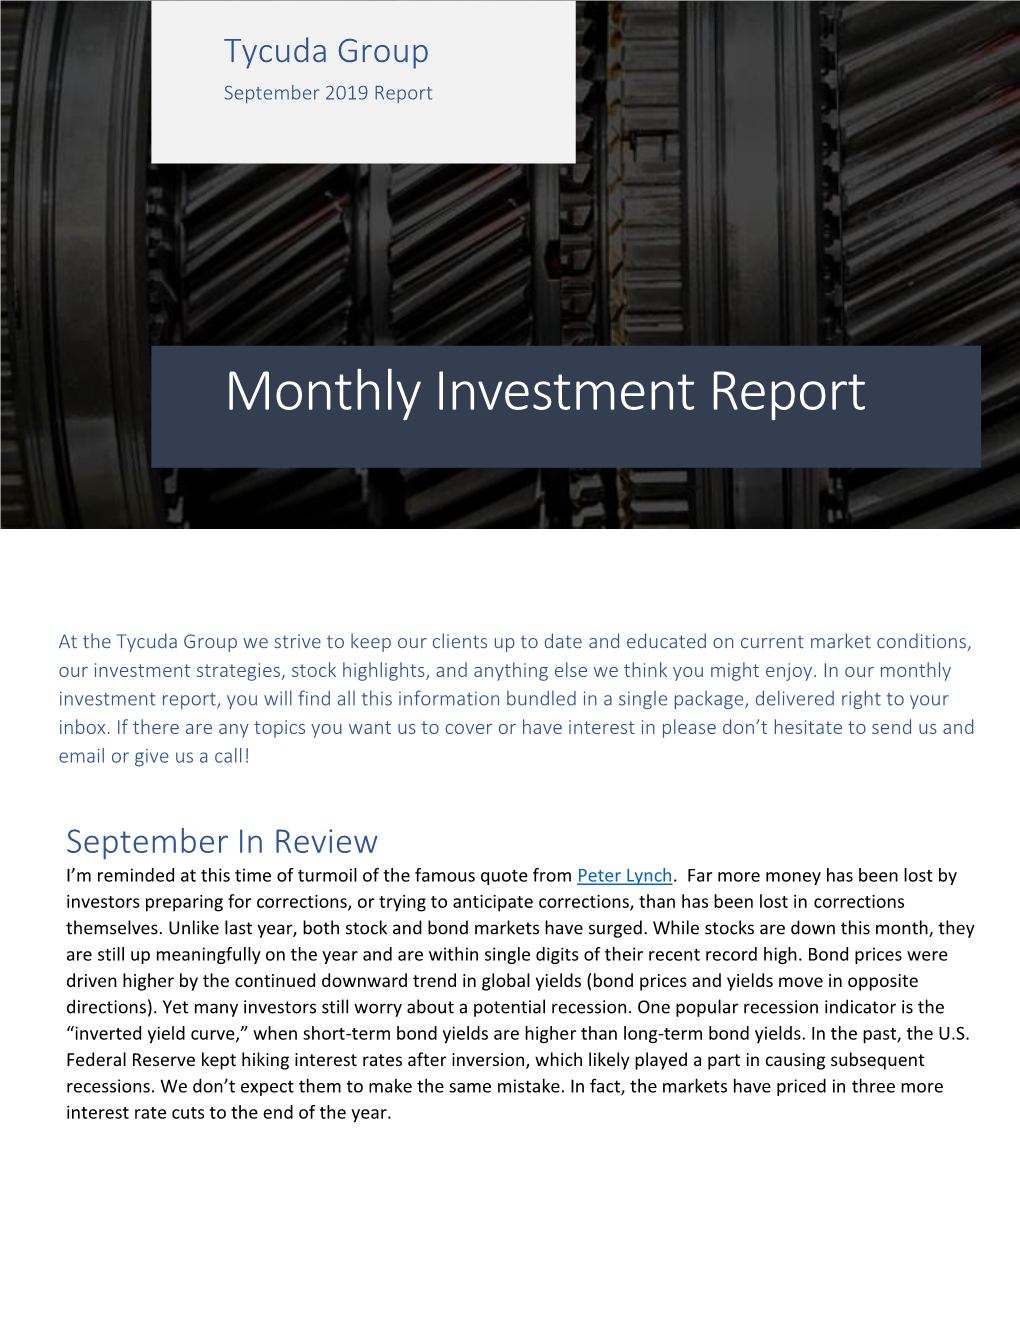 Monthly Investment Report